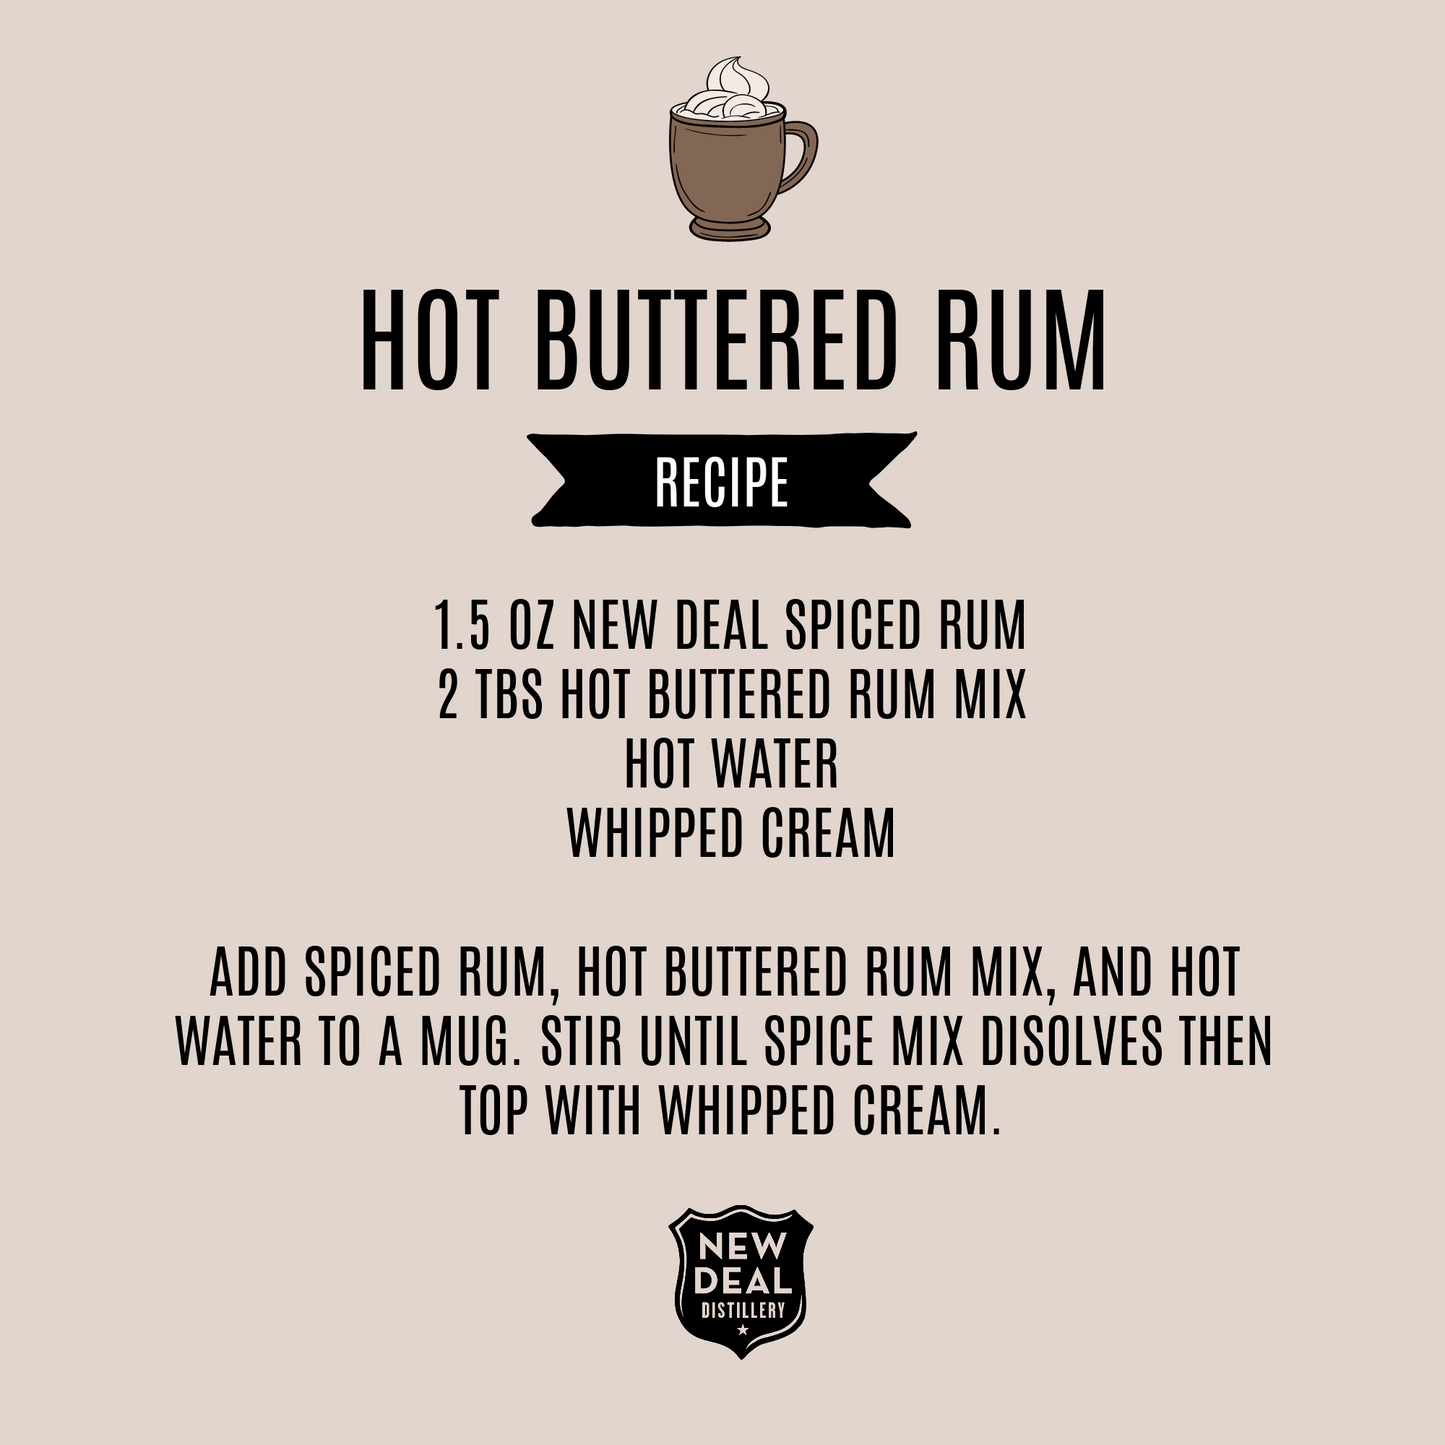 New Deal Hot Buttered Rum Drink Mix